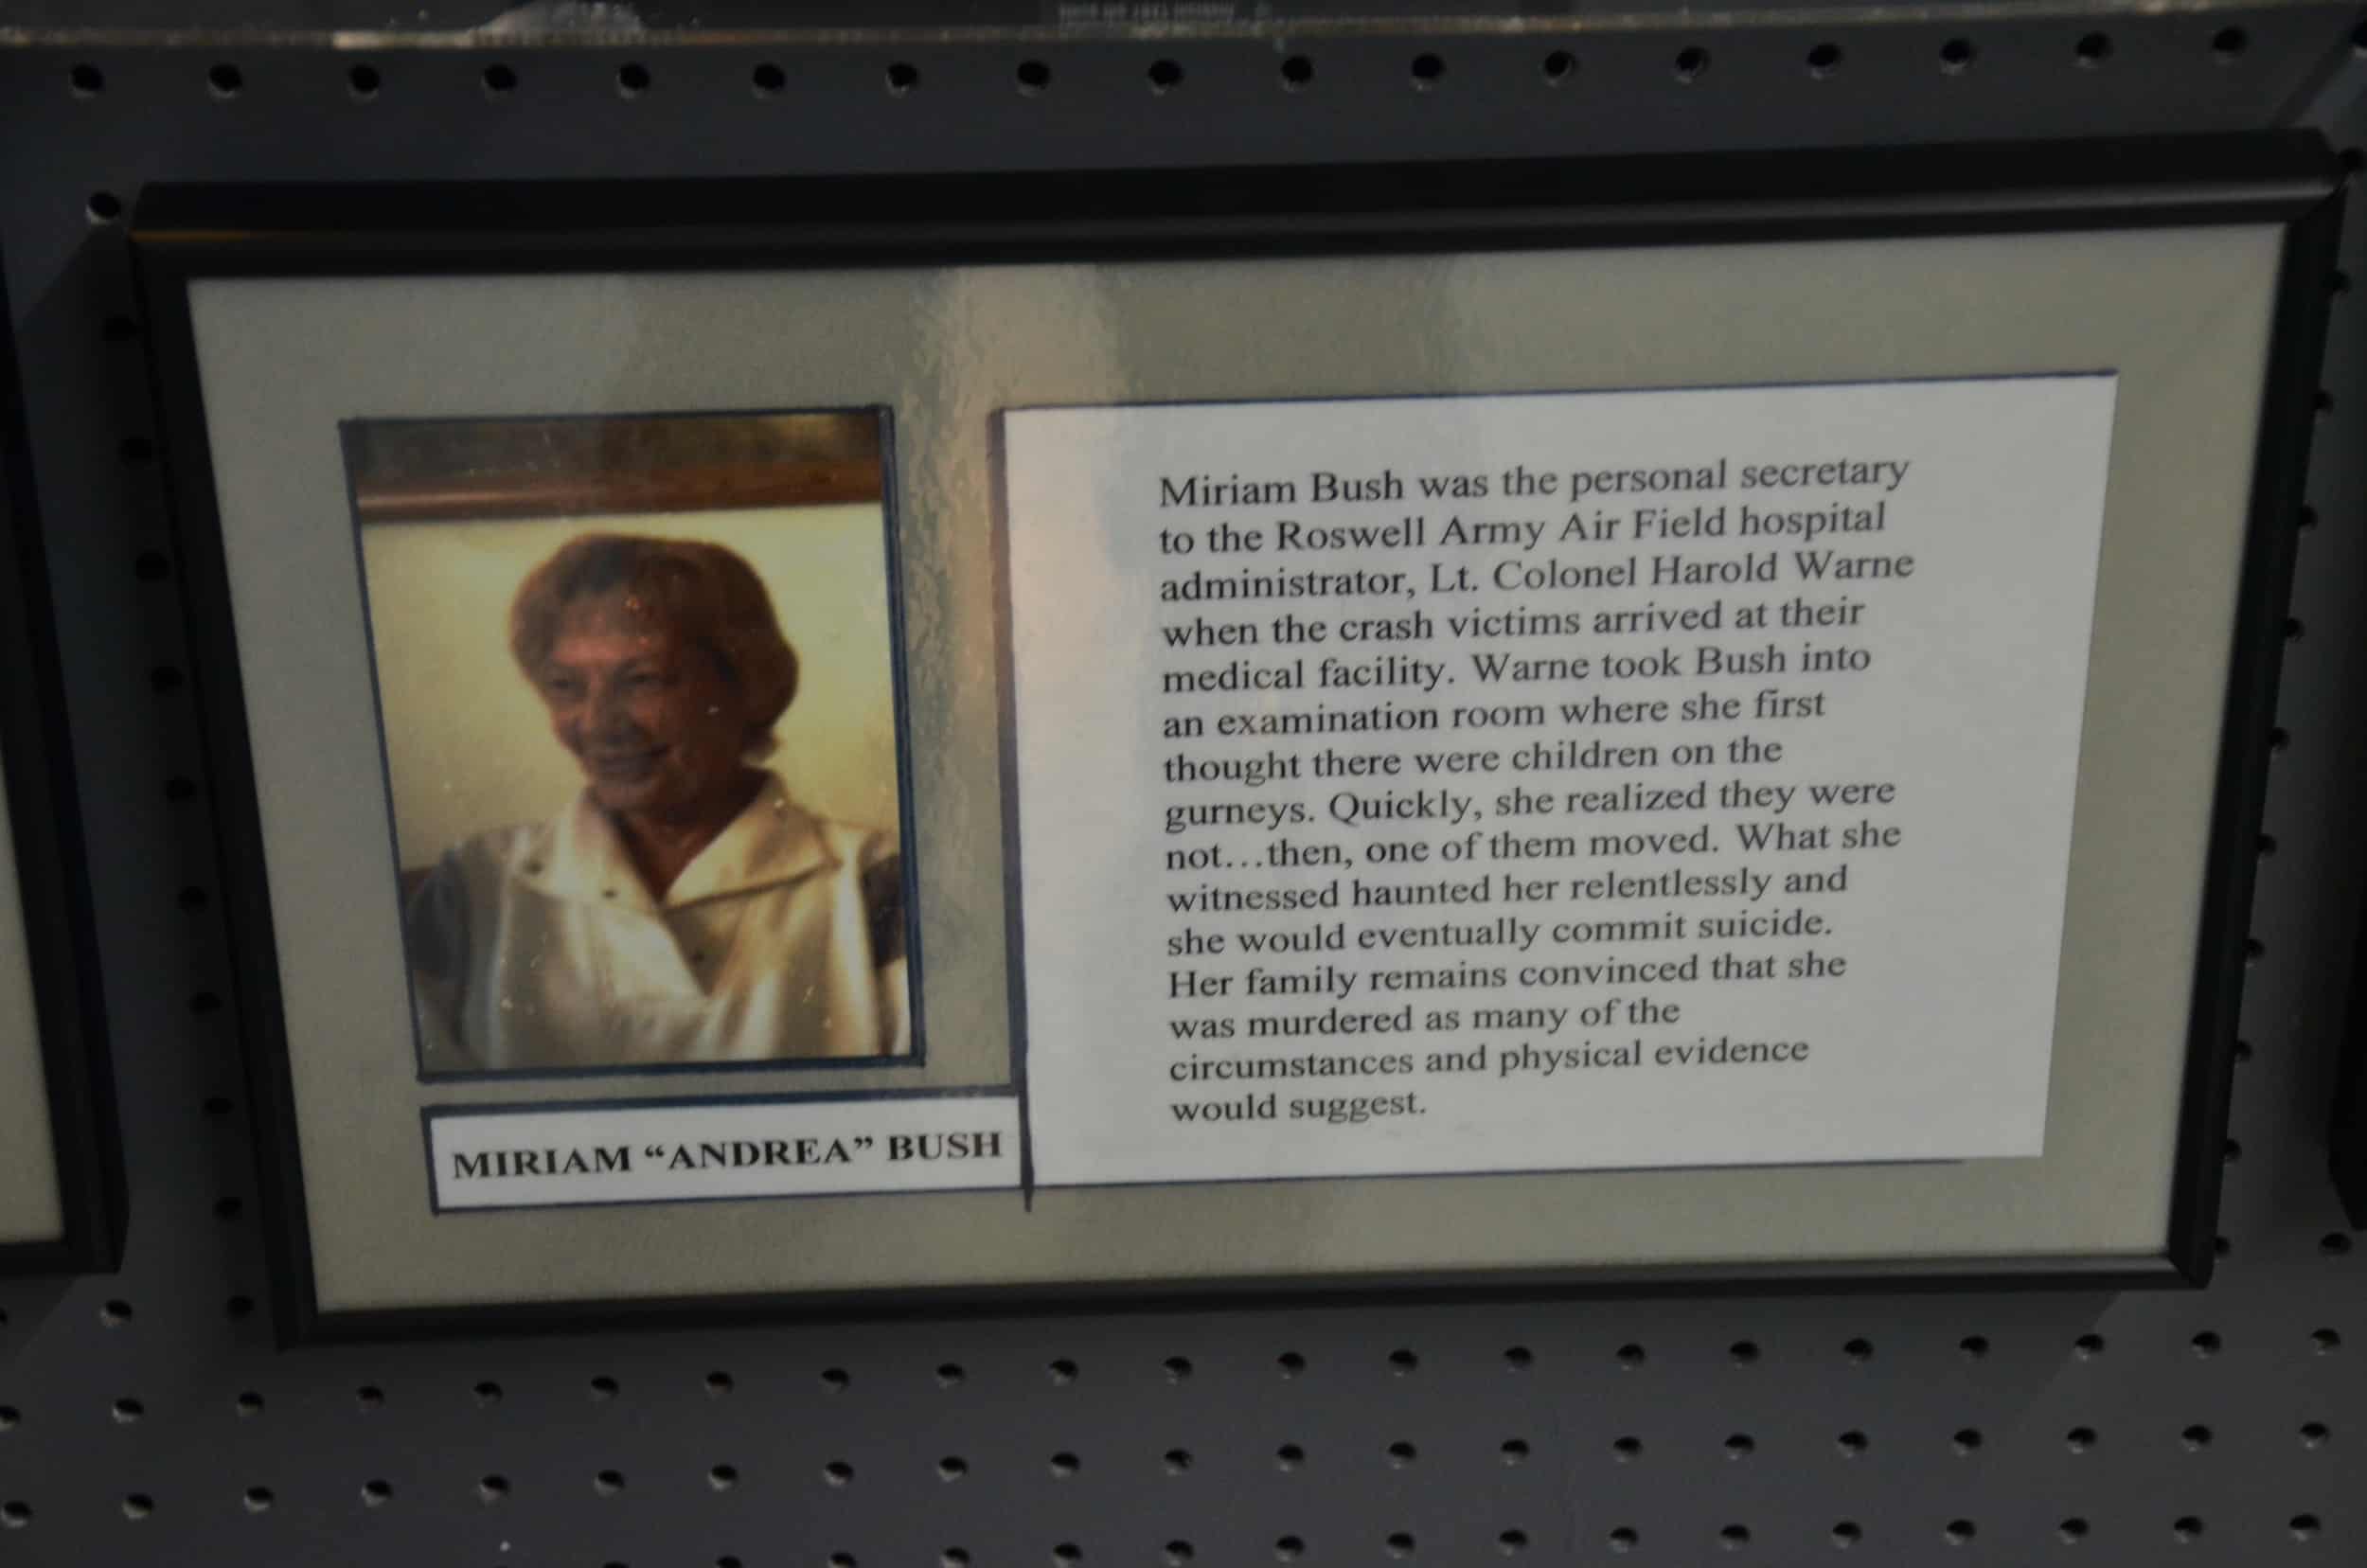 Story of Miriam Bush at the International UFO Museum and Research Center in Roswell, New Mexico